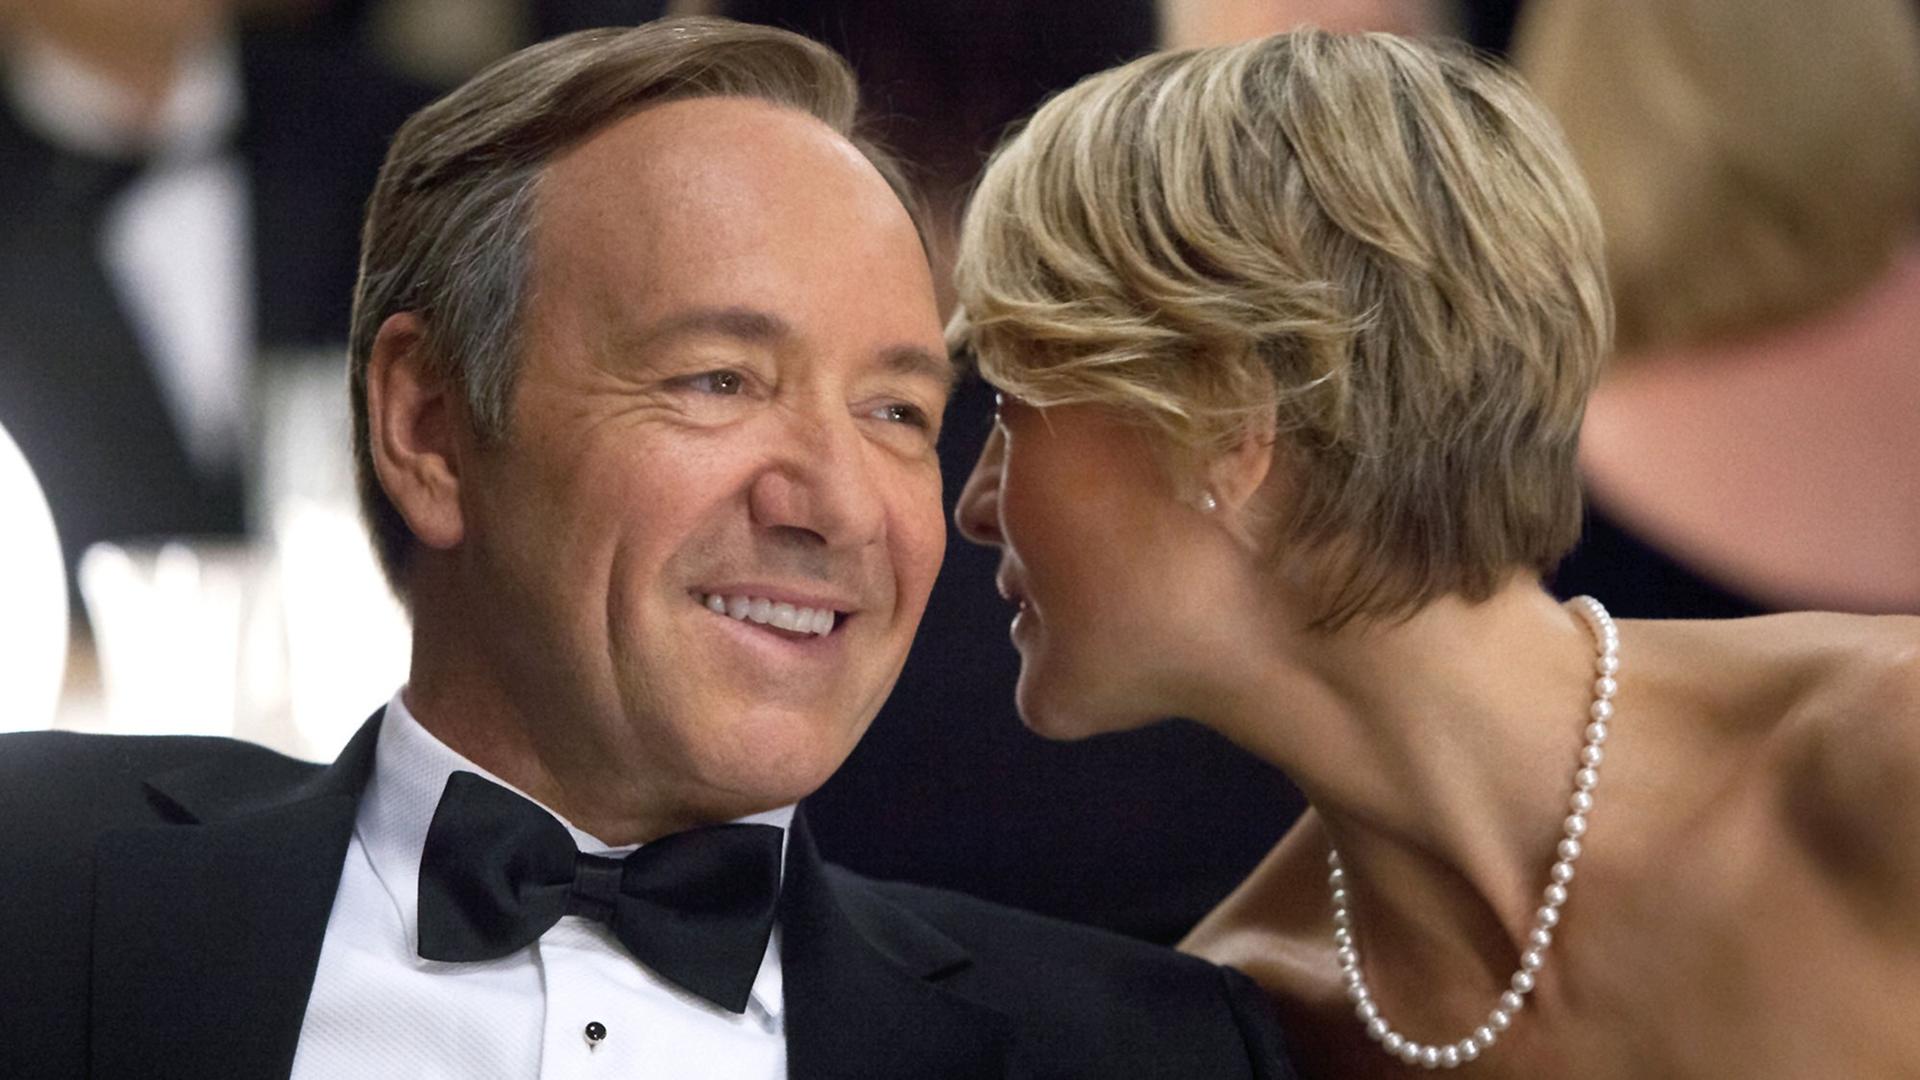 Kevin Spacey spielt Frank Underwood in "House of Cards"